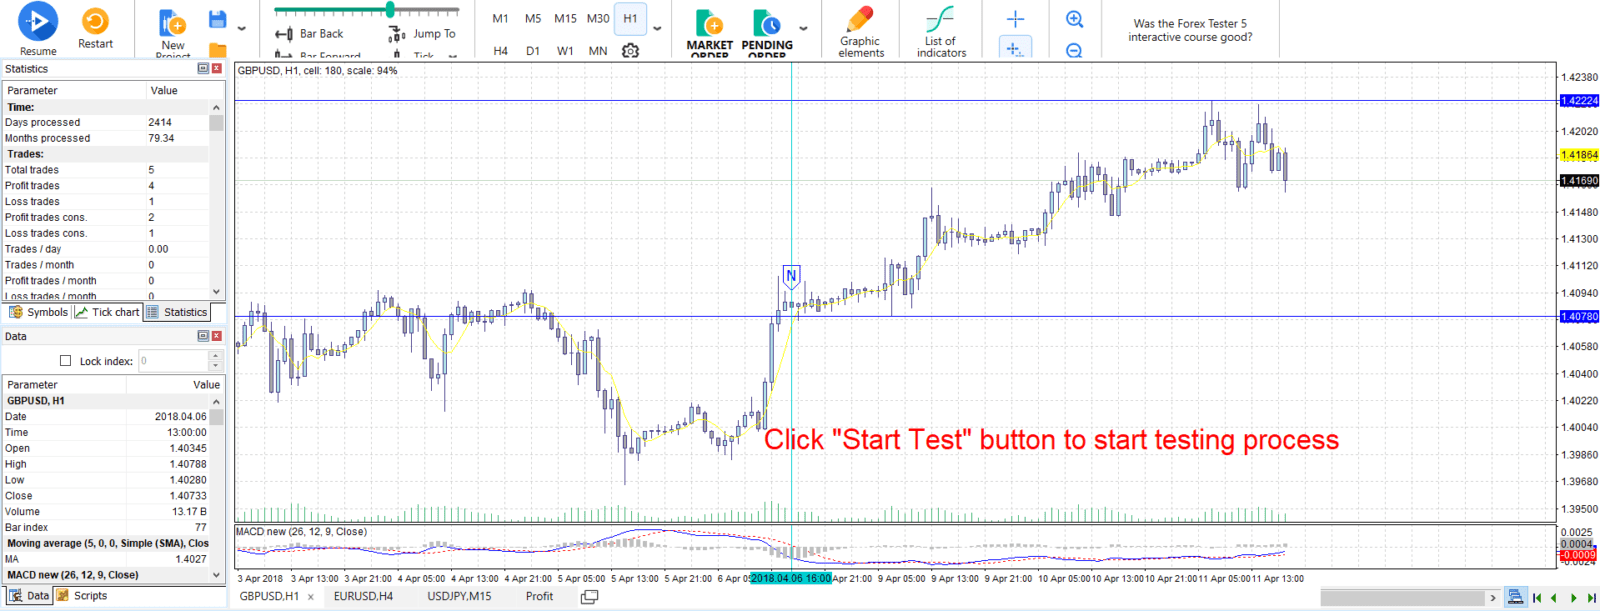 forex backtesting software free download